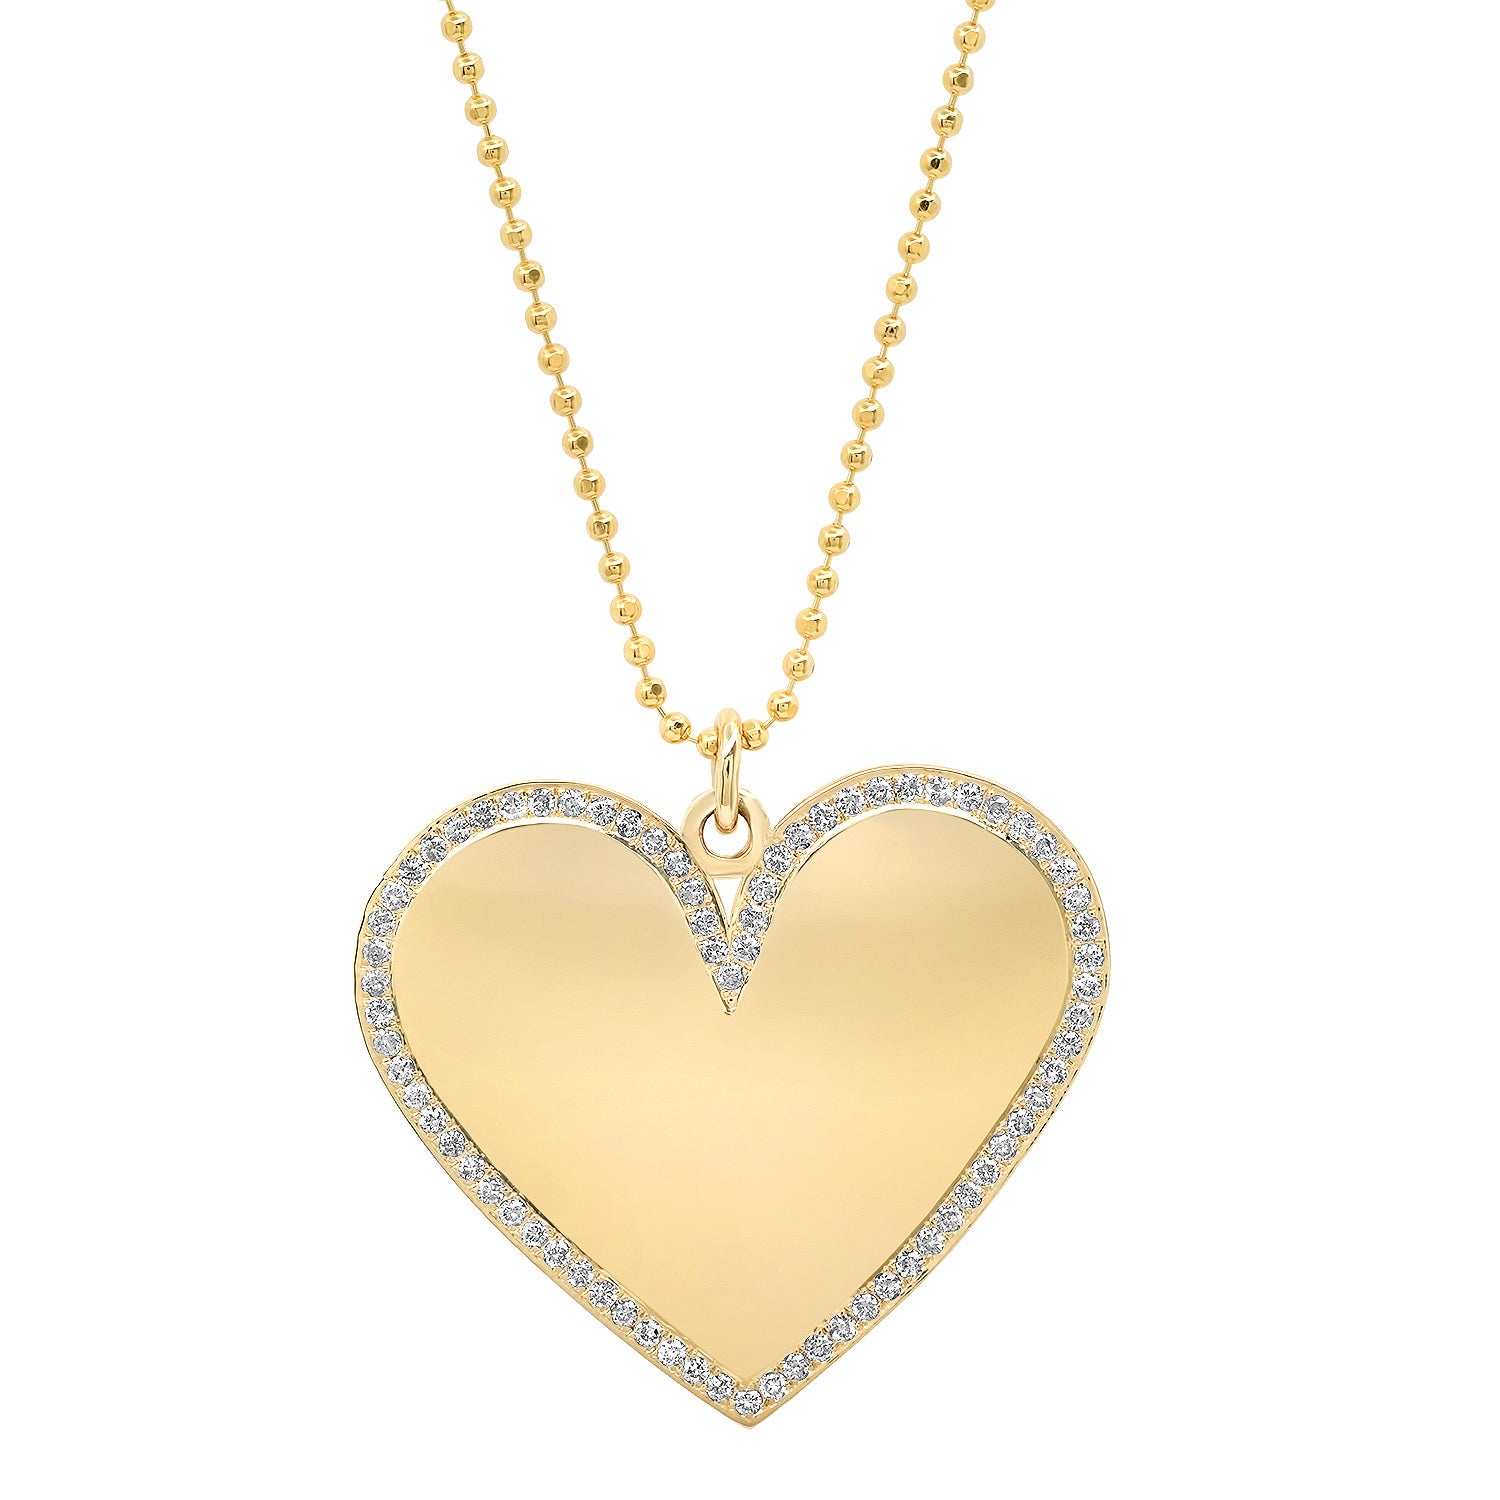 Big Heart Necklace – Co. Kind Jewelry